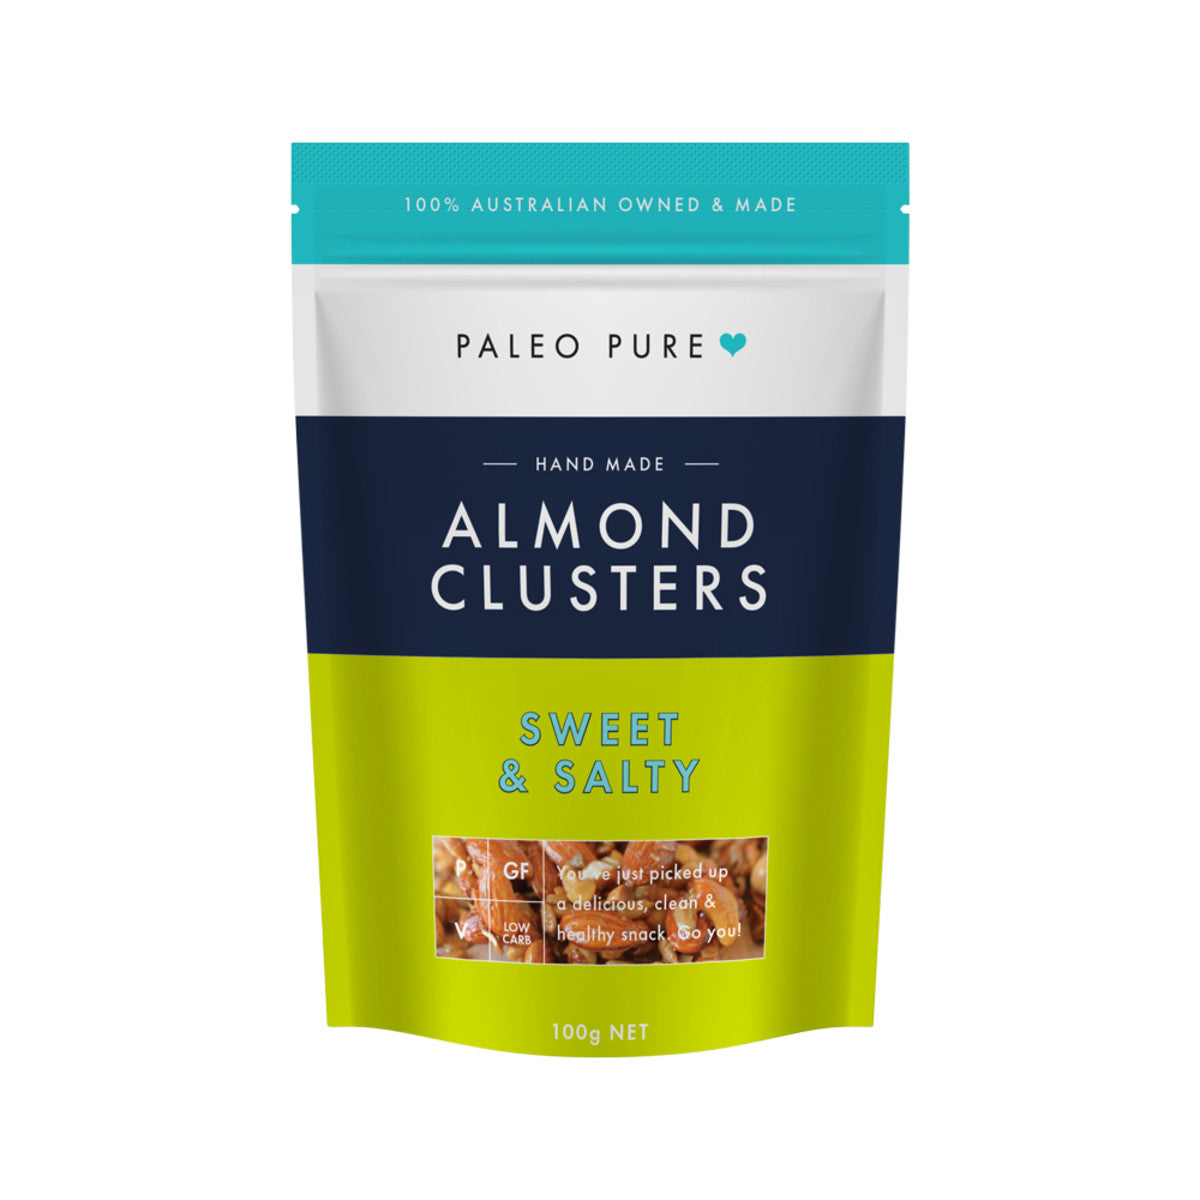 Paleo Pure Almond Clusters Sweet and Salty 100g